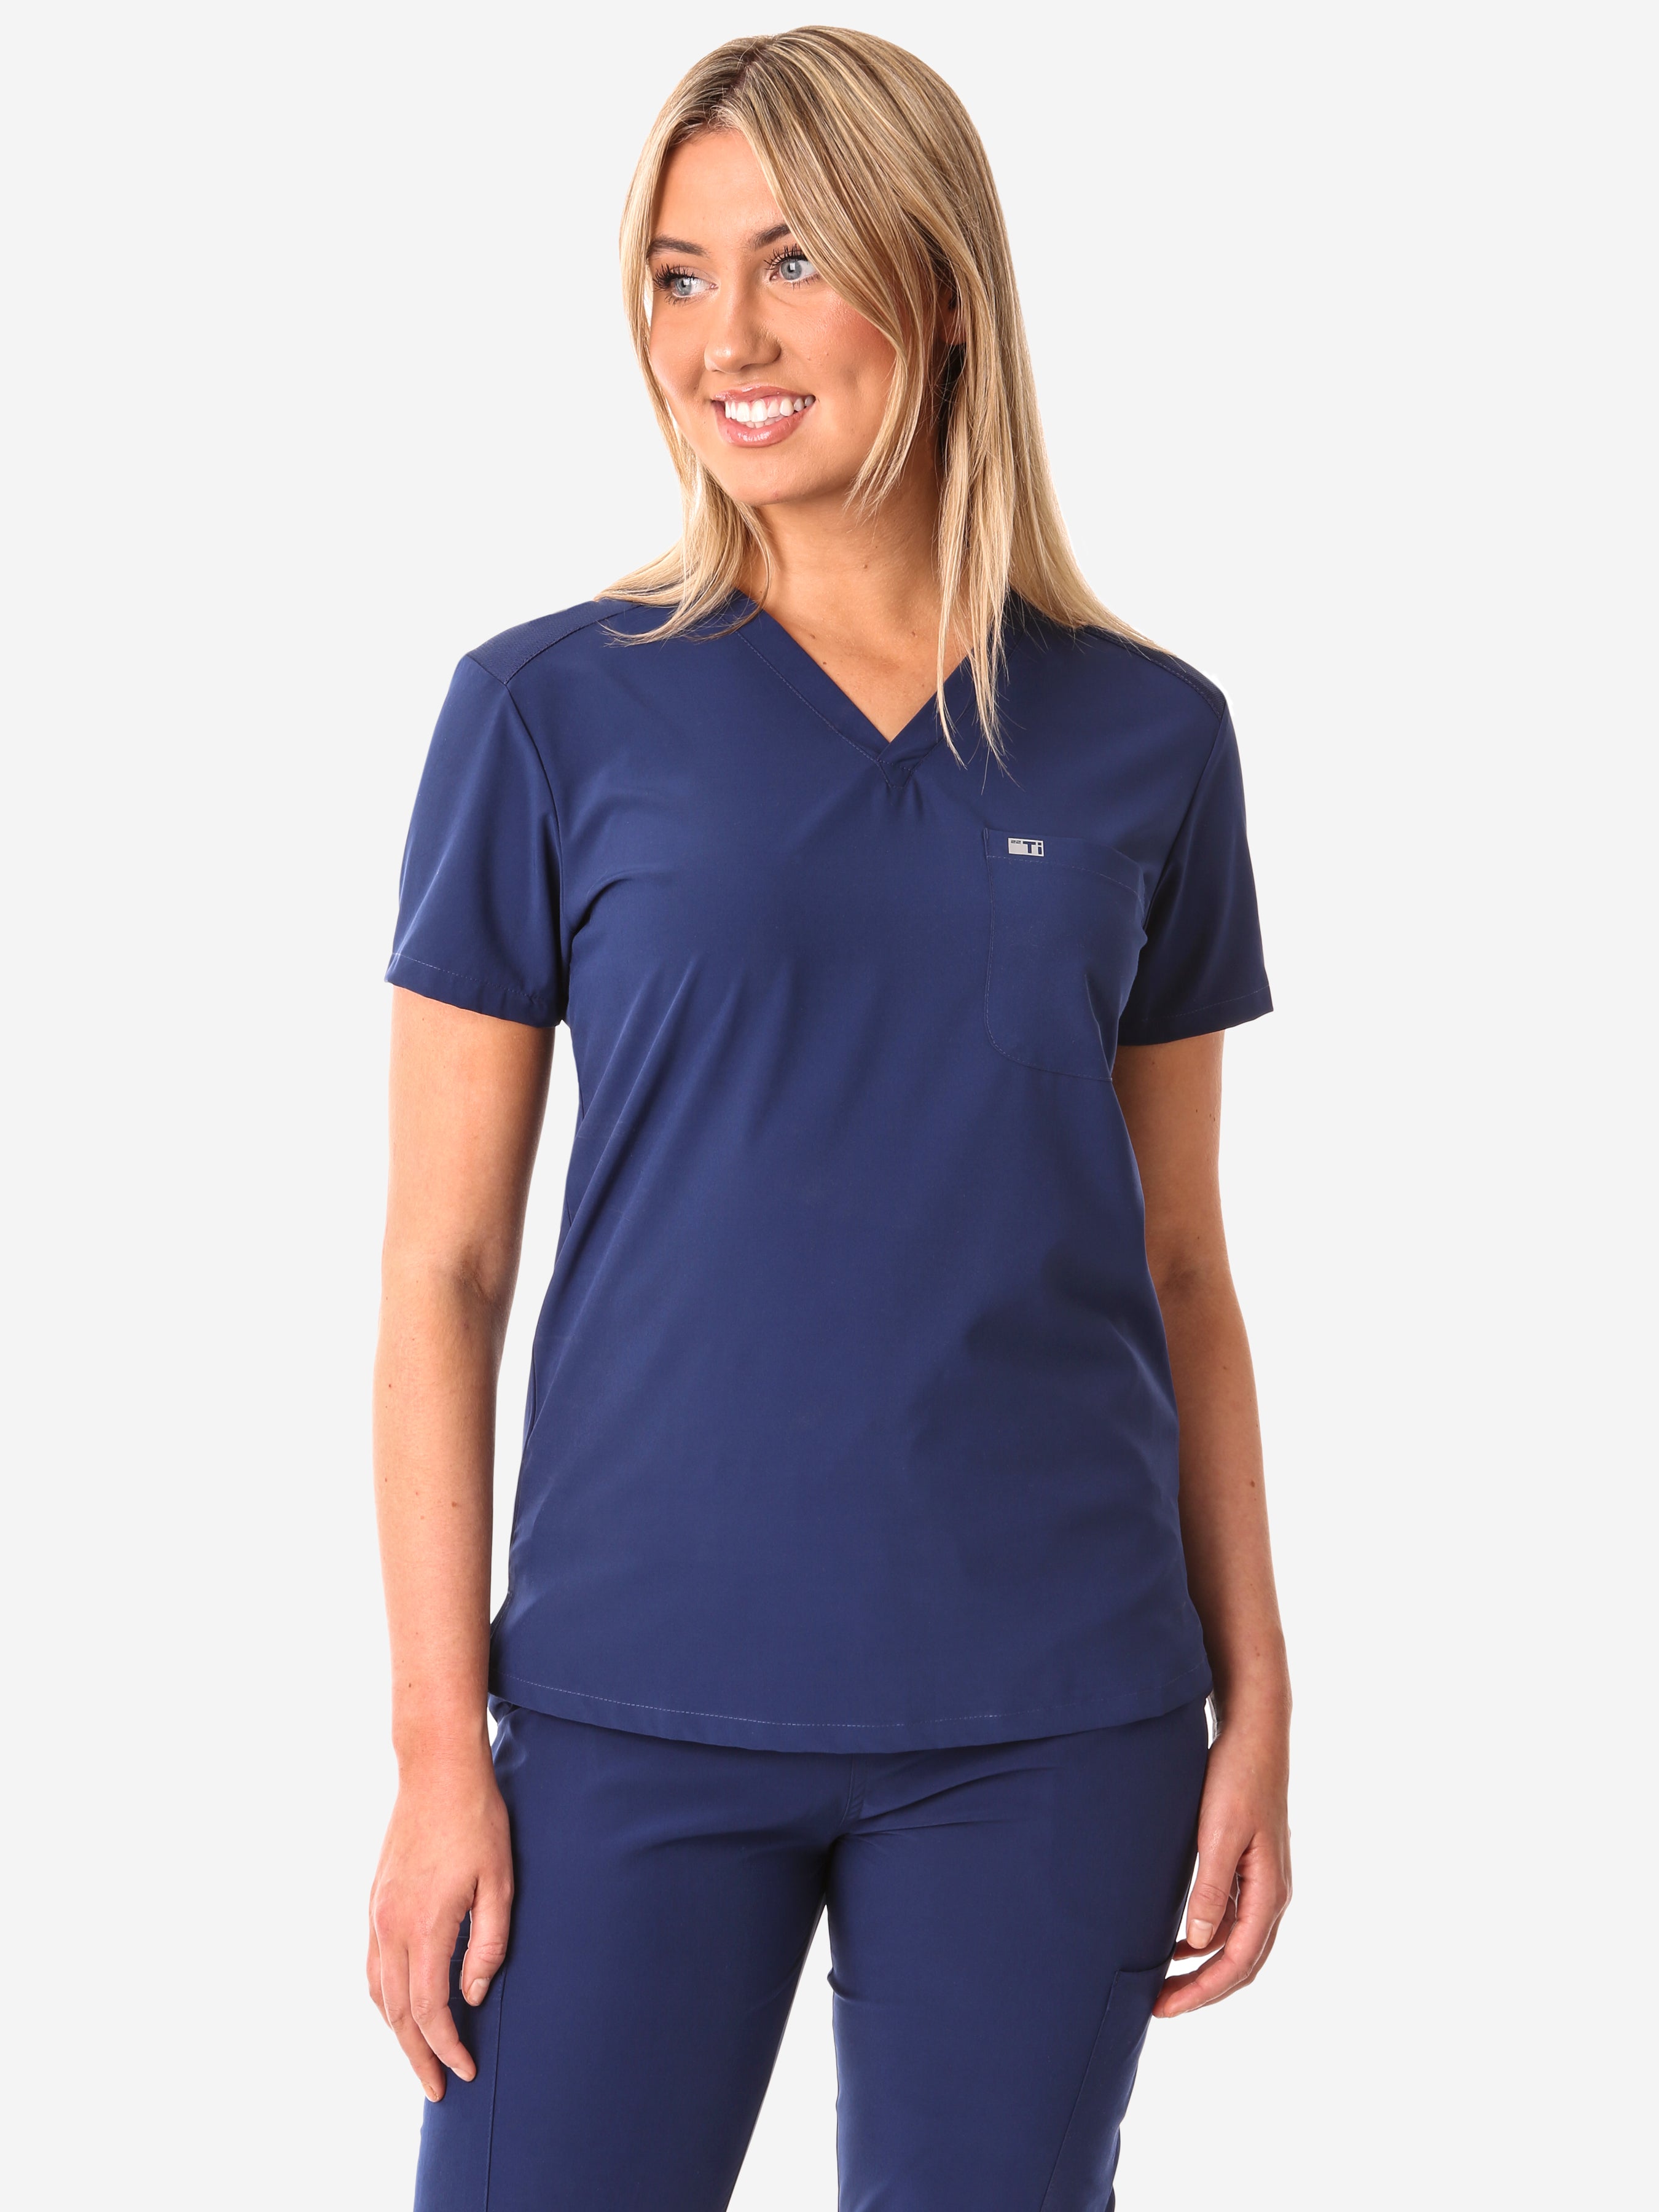 TiScrubs Women's Stretch Navy Blue One-Pocket Scrub Top Untucked Front View Top Only